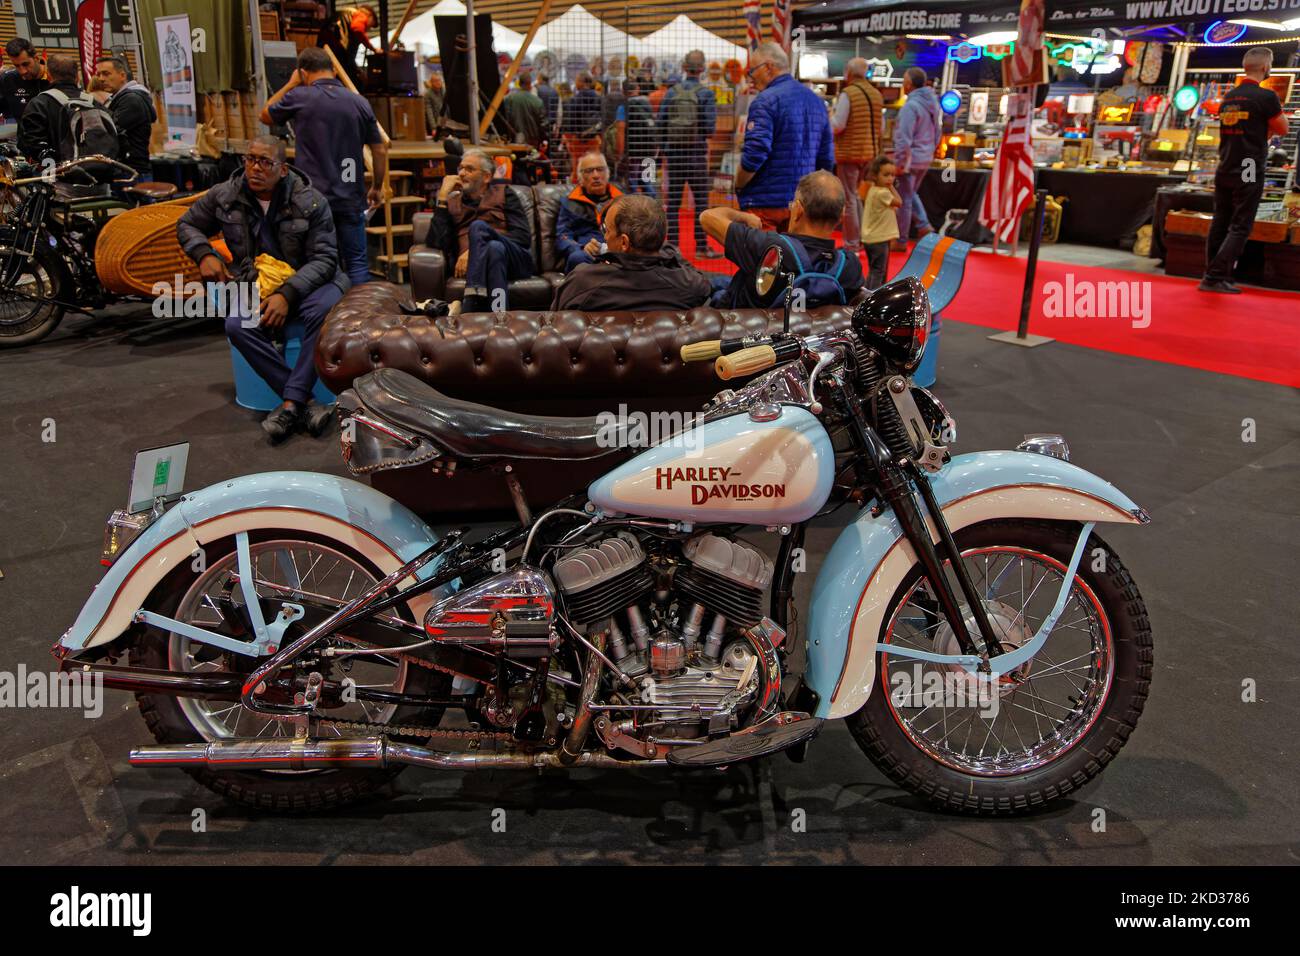 LYON, FRANCE, November 4, 2022 : Harley-Davidson motorbike at the Motor Show Epoq'Auto. The exhibition is held at Eurexpo each year with more than 700 Stock Photo